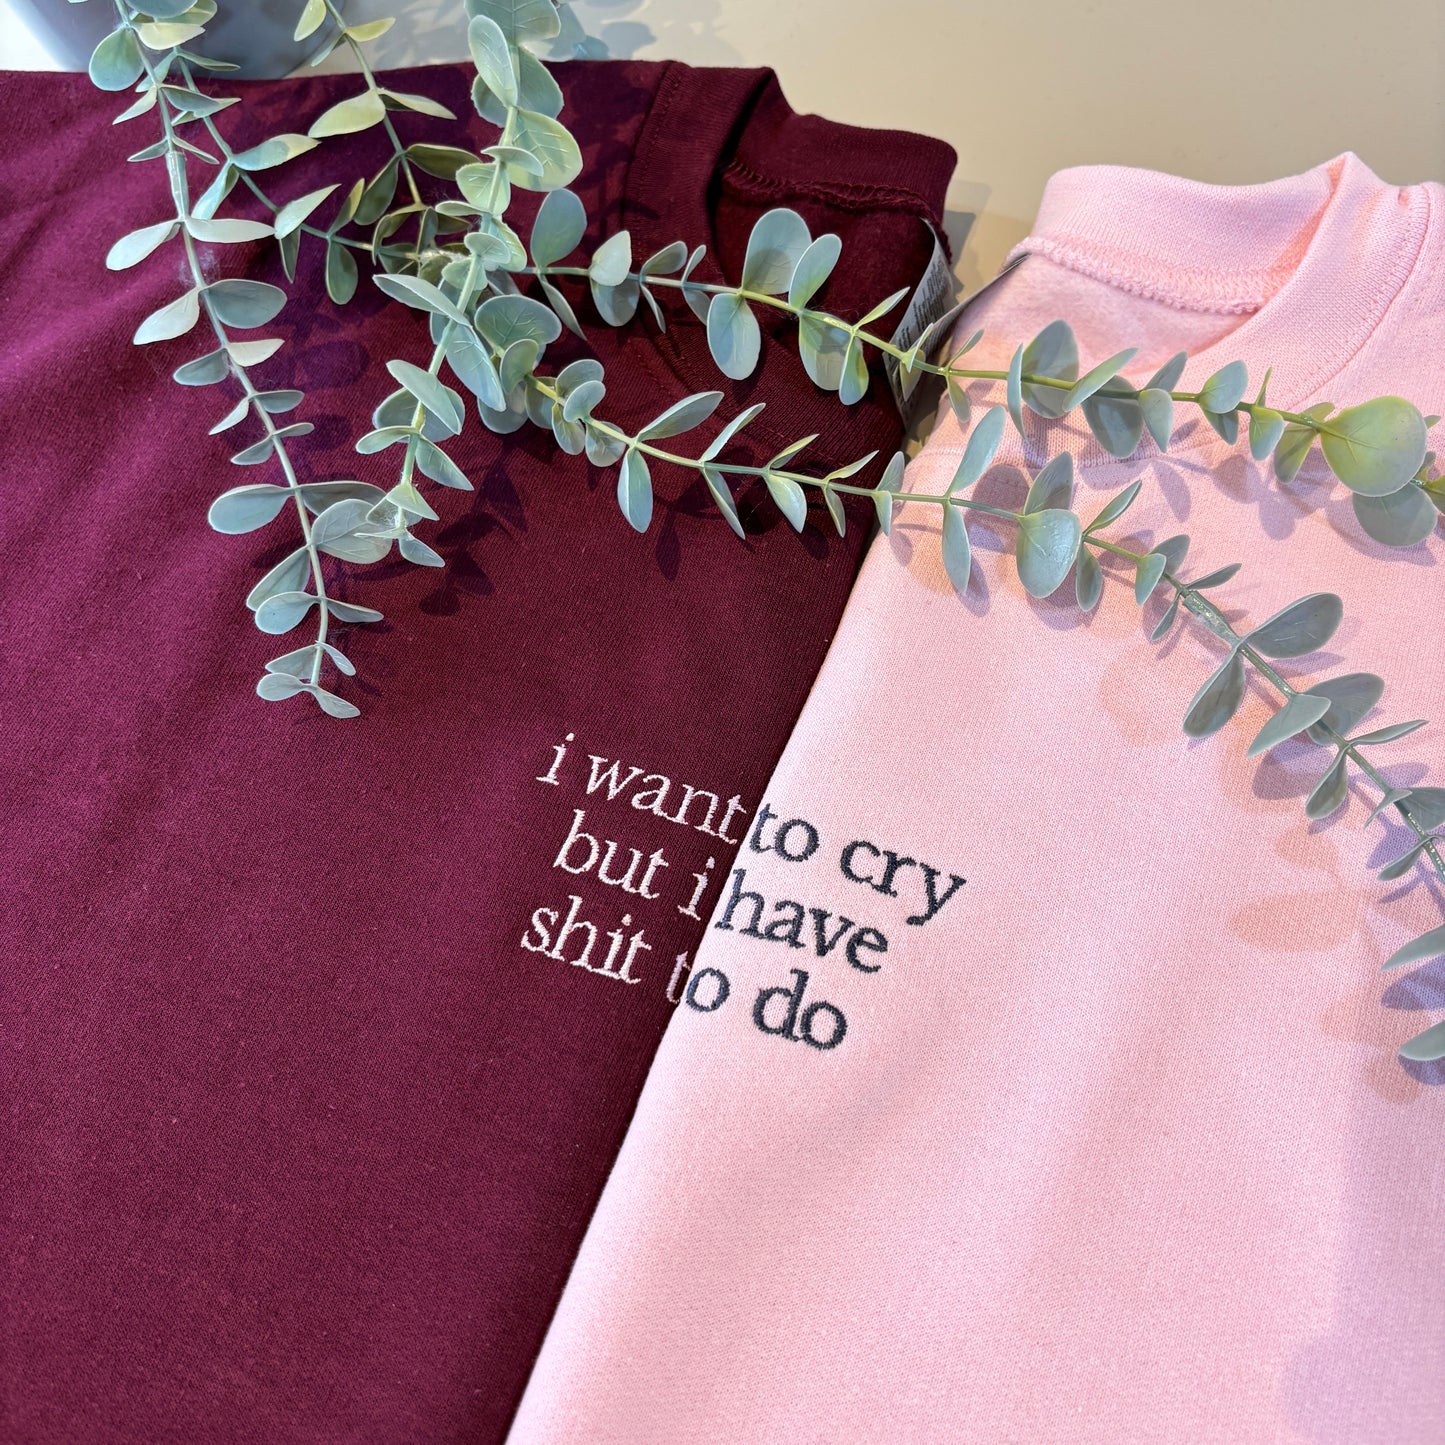 I WANT TO CRY EMBROIDERED SWEATSHIRT